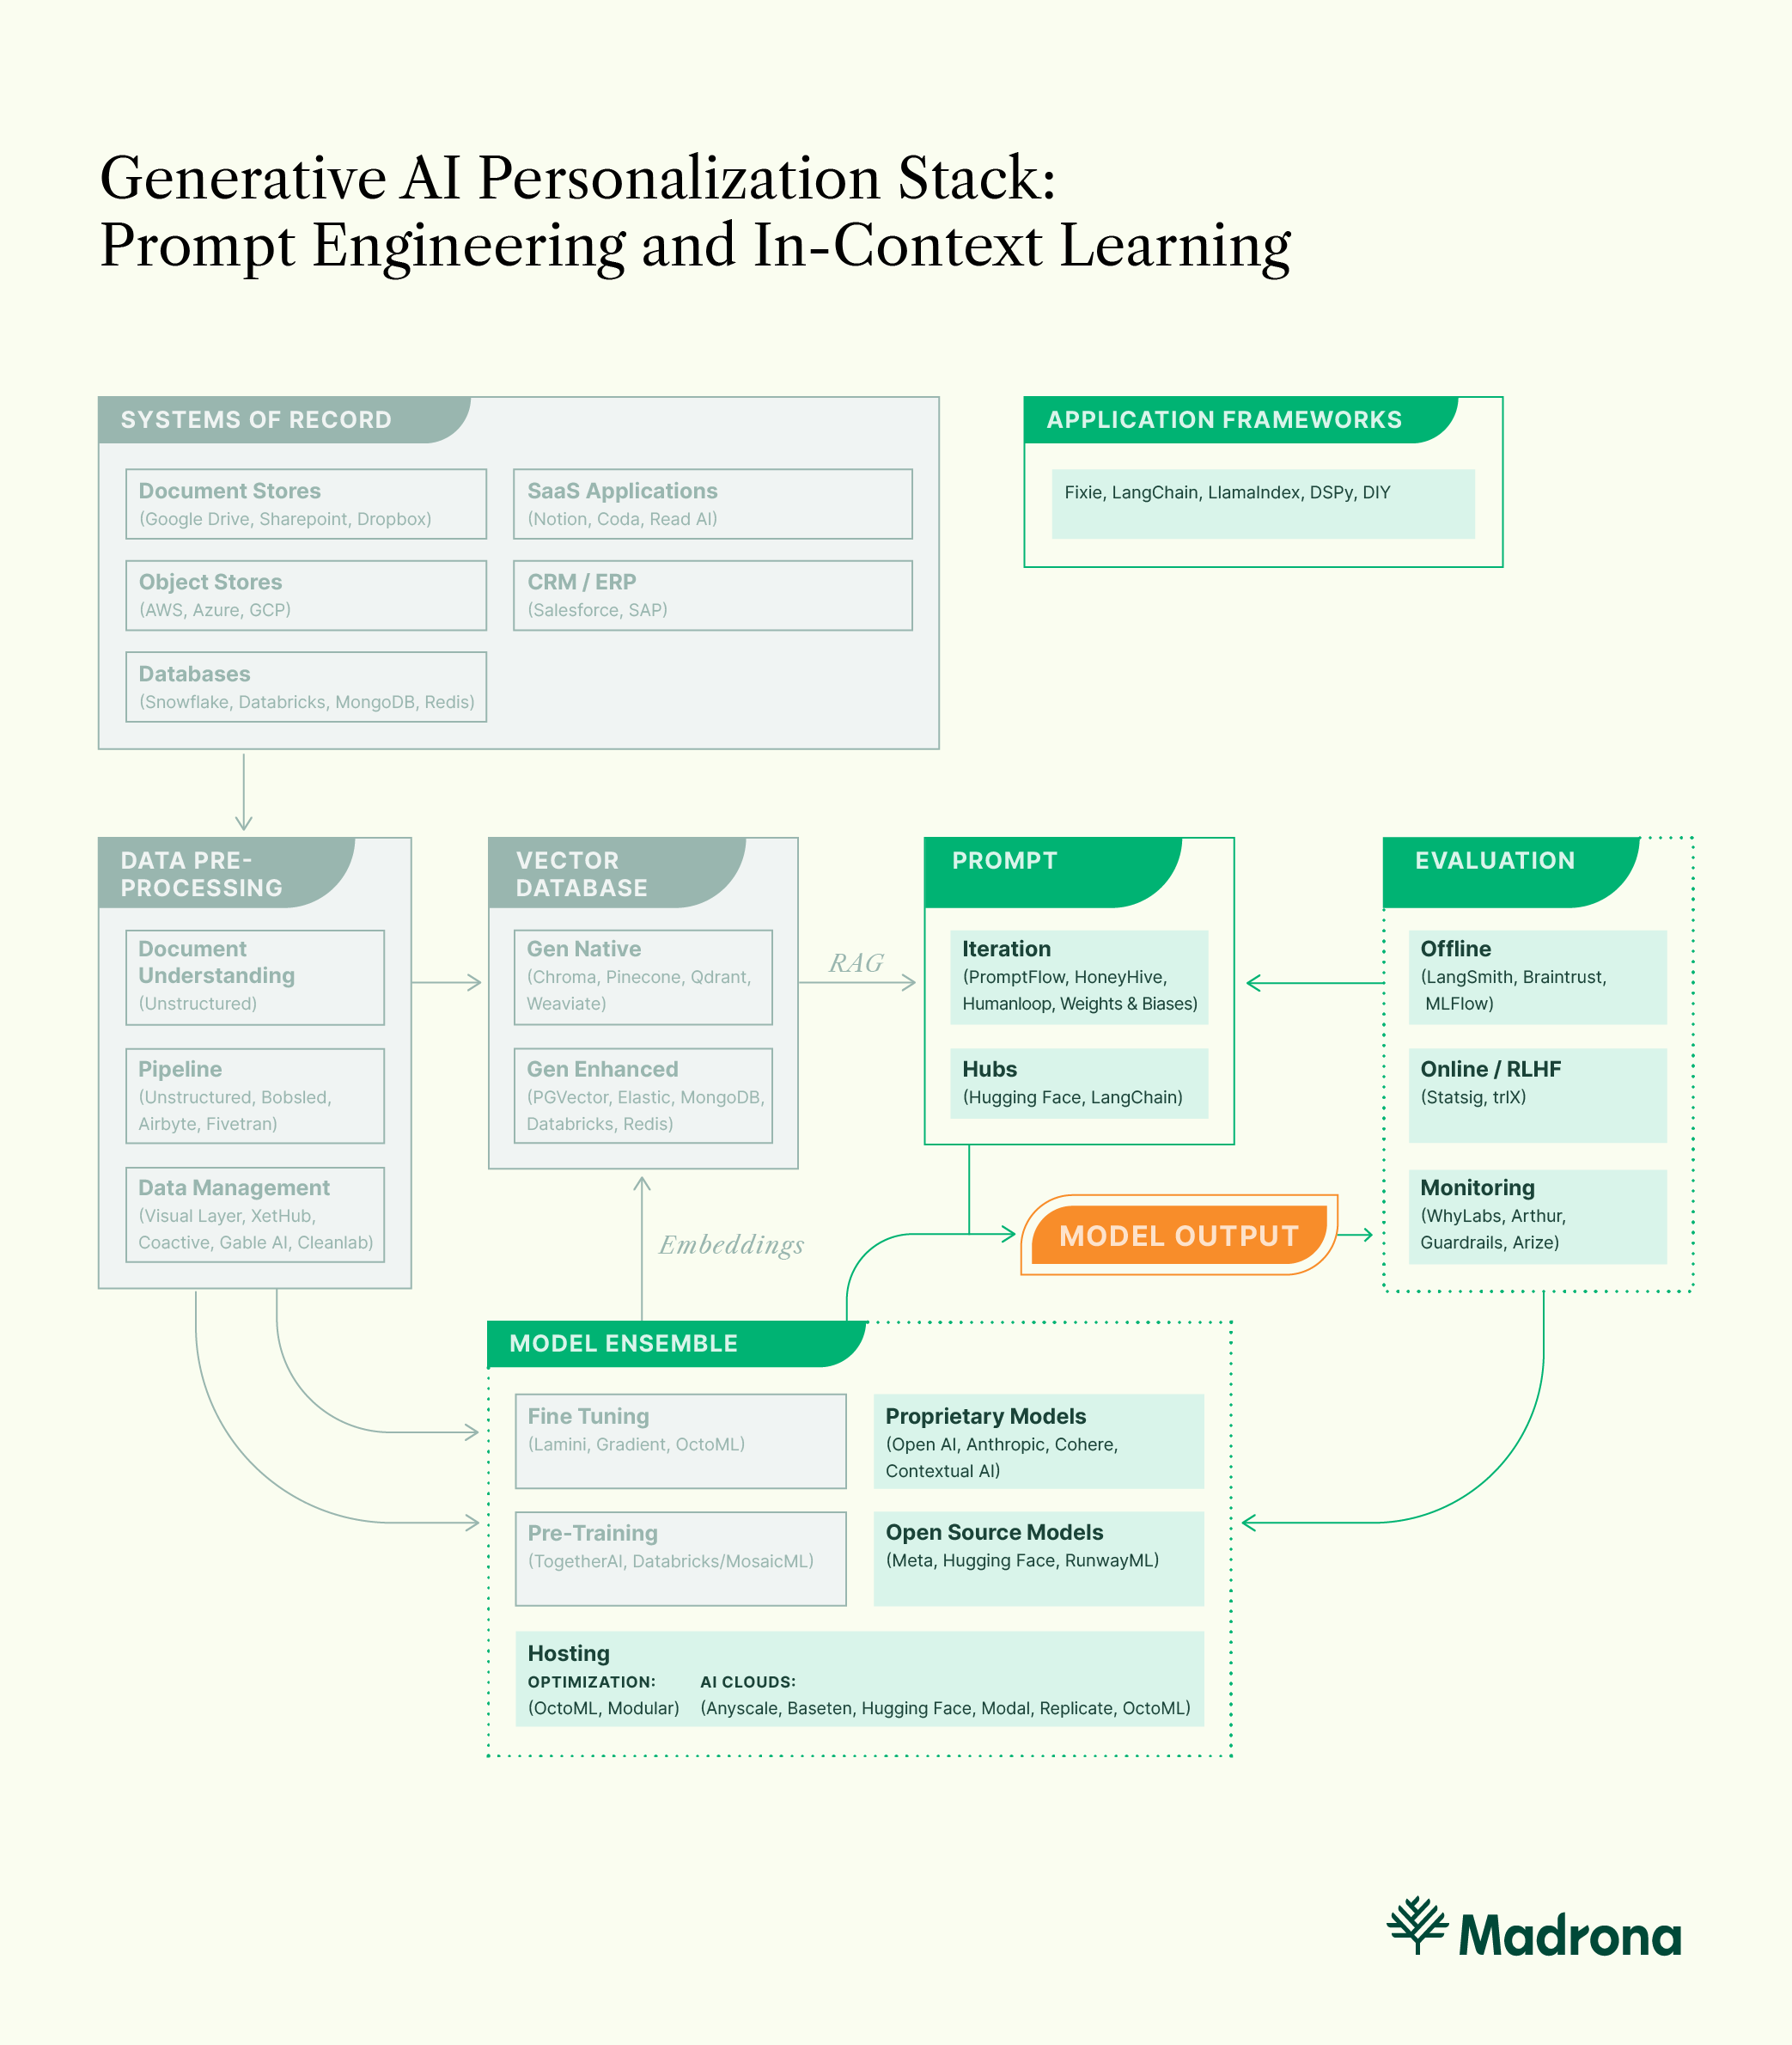 Personalizing Generative Applications: Prompt engineering and in-context learning